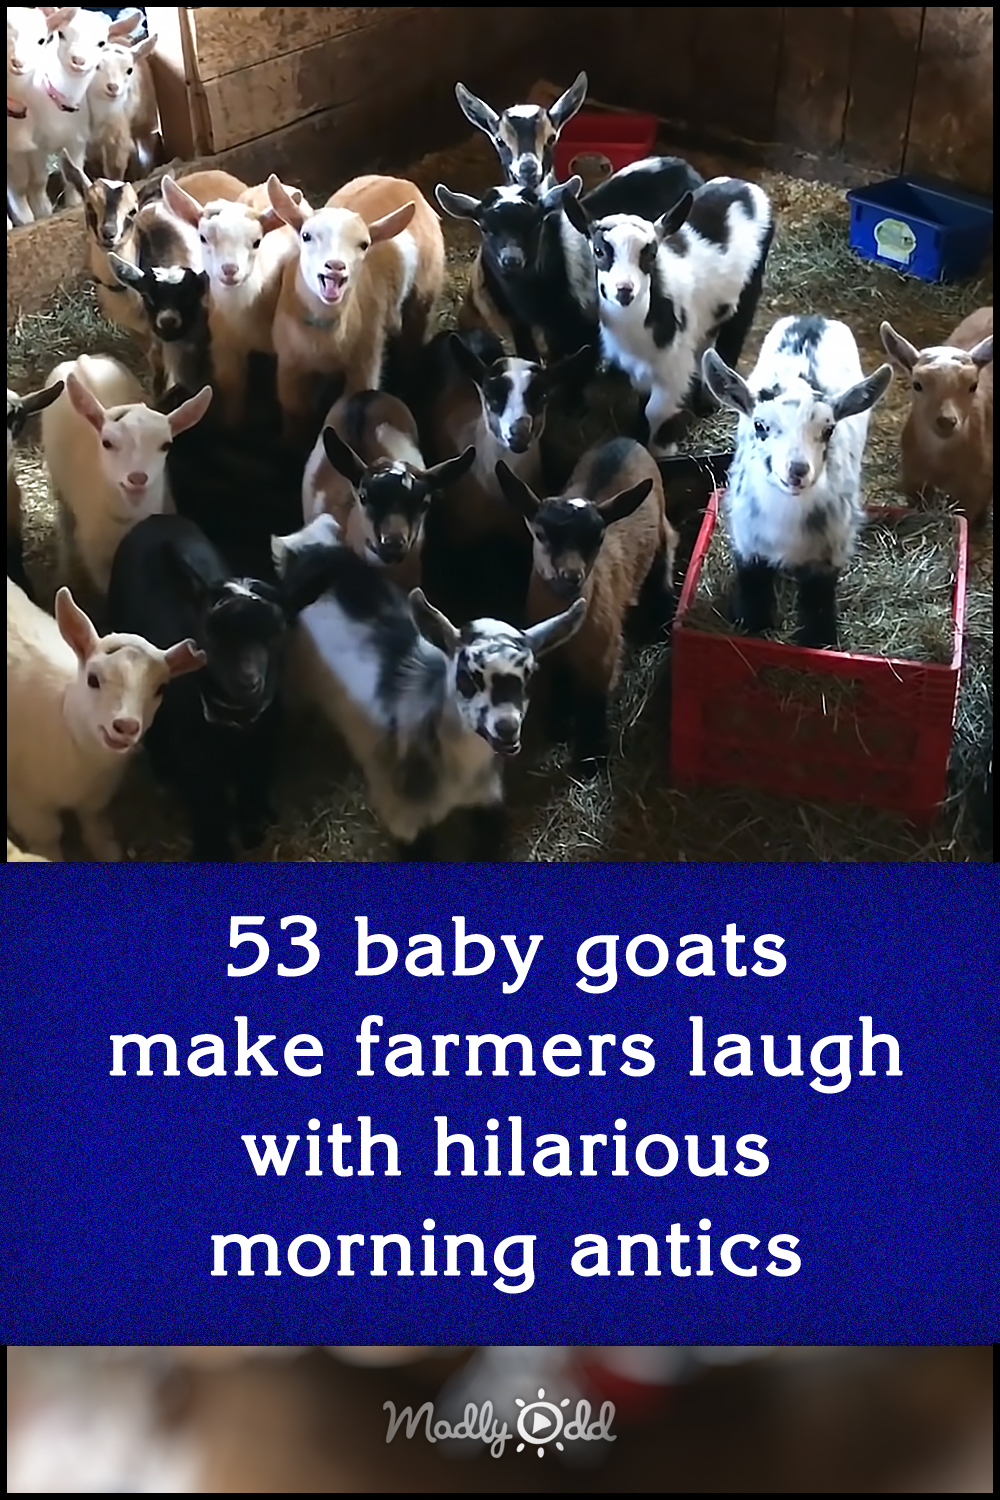 53 baby goats make farmers laugh with hilarious morning antics